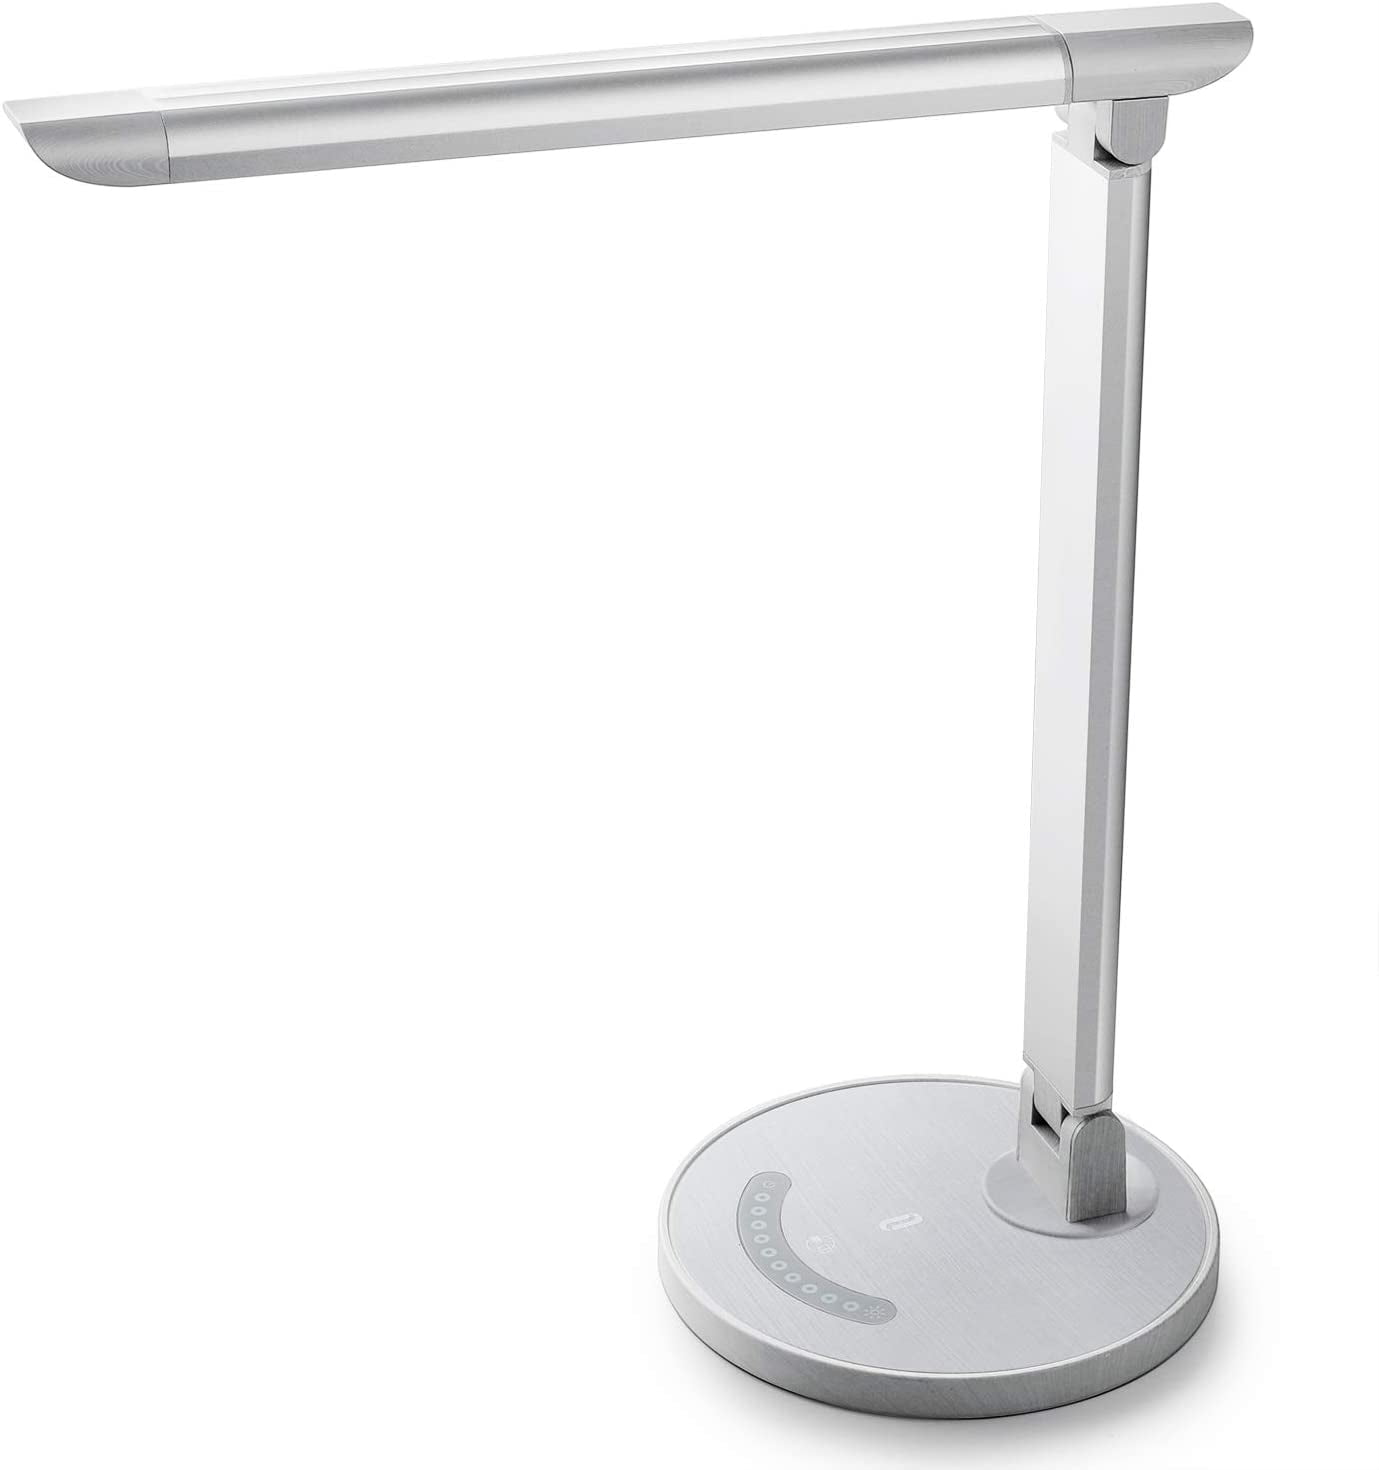 TaoTronics White Wood Grain LED Desk, Eye-Caring Table, Dimmable Office Lamp  with USB Charging Port, 5 Lighting Modes with 7 Brightness Levels, Touch  Control, 12W - Walmart.com